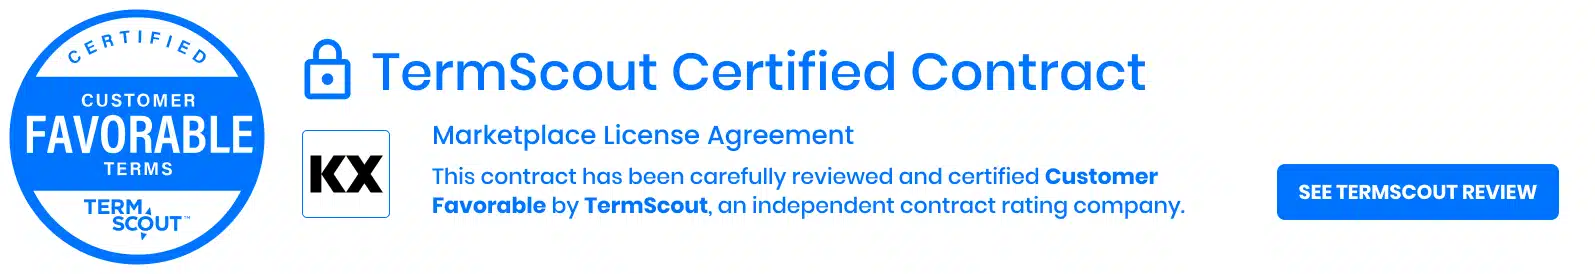 TermScout Certified Contract - Marketplace License Agreement